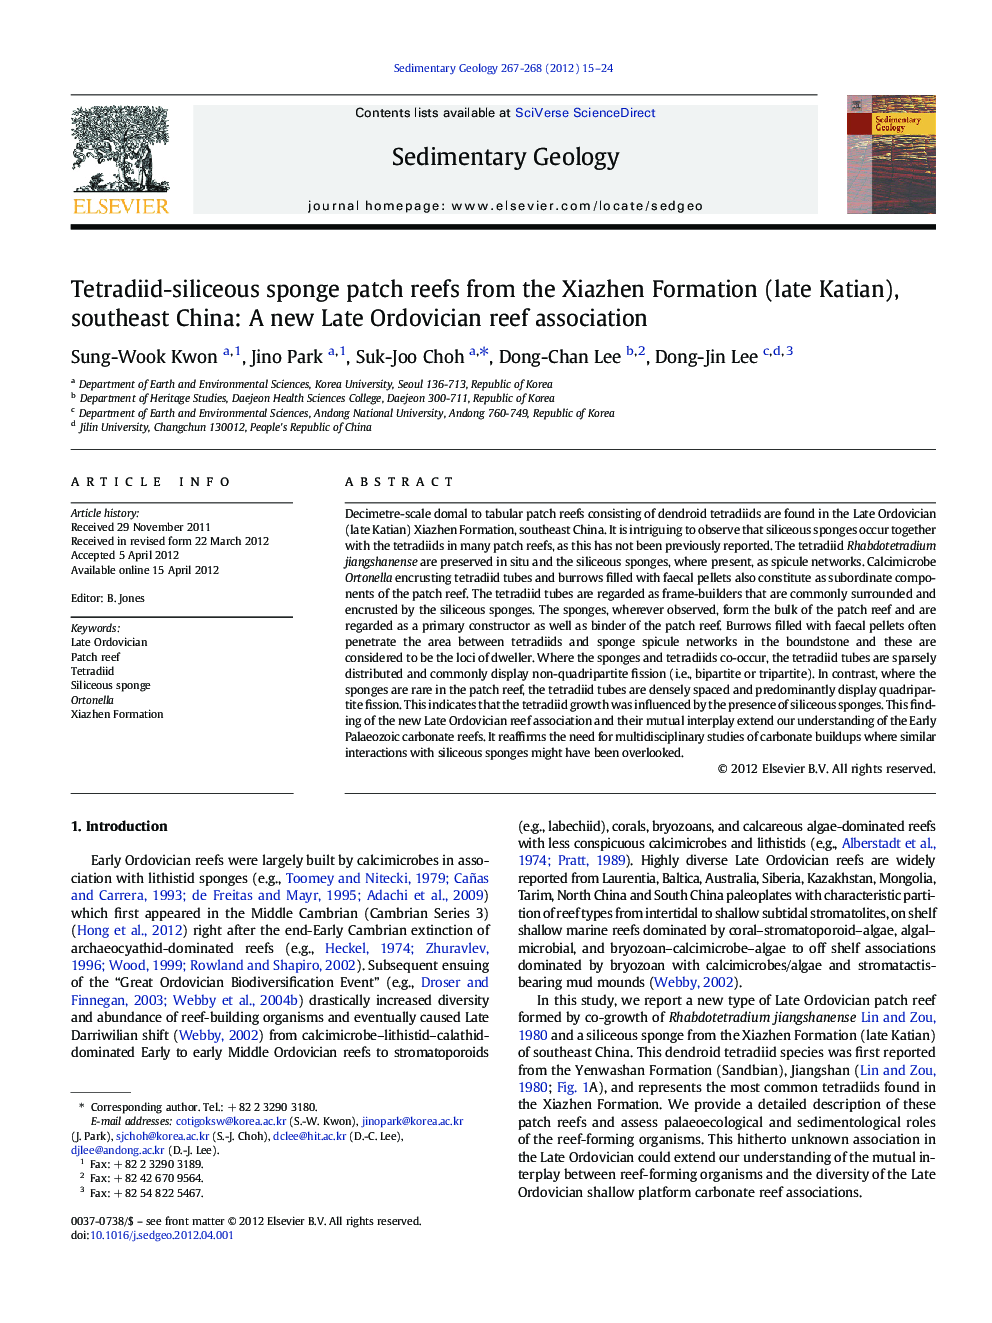 Tetradiid-siliceous sponge patch reefs from the Xiazhen Formation (late Katian), southeast China: A new Late Ordovician reef association